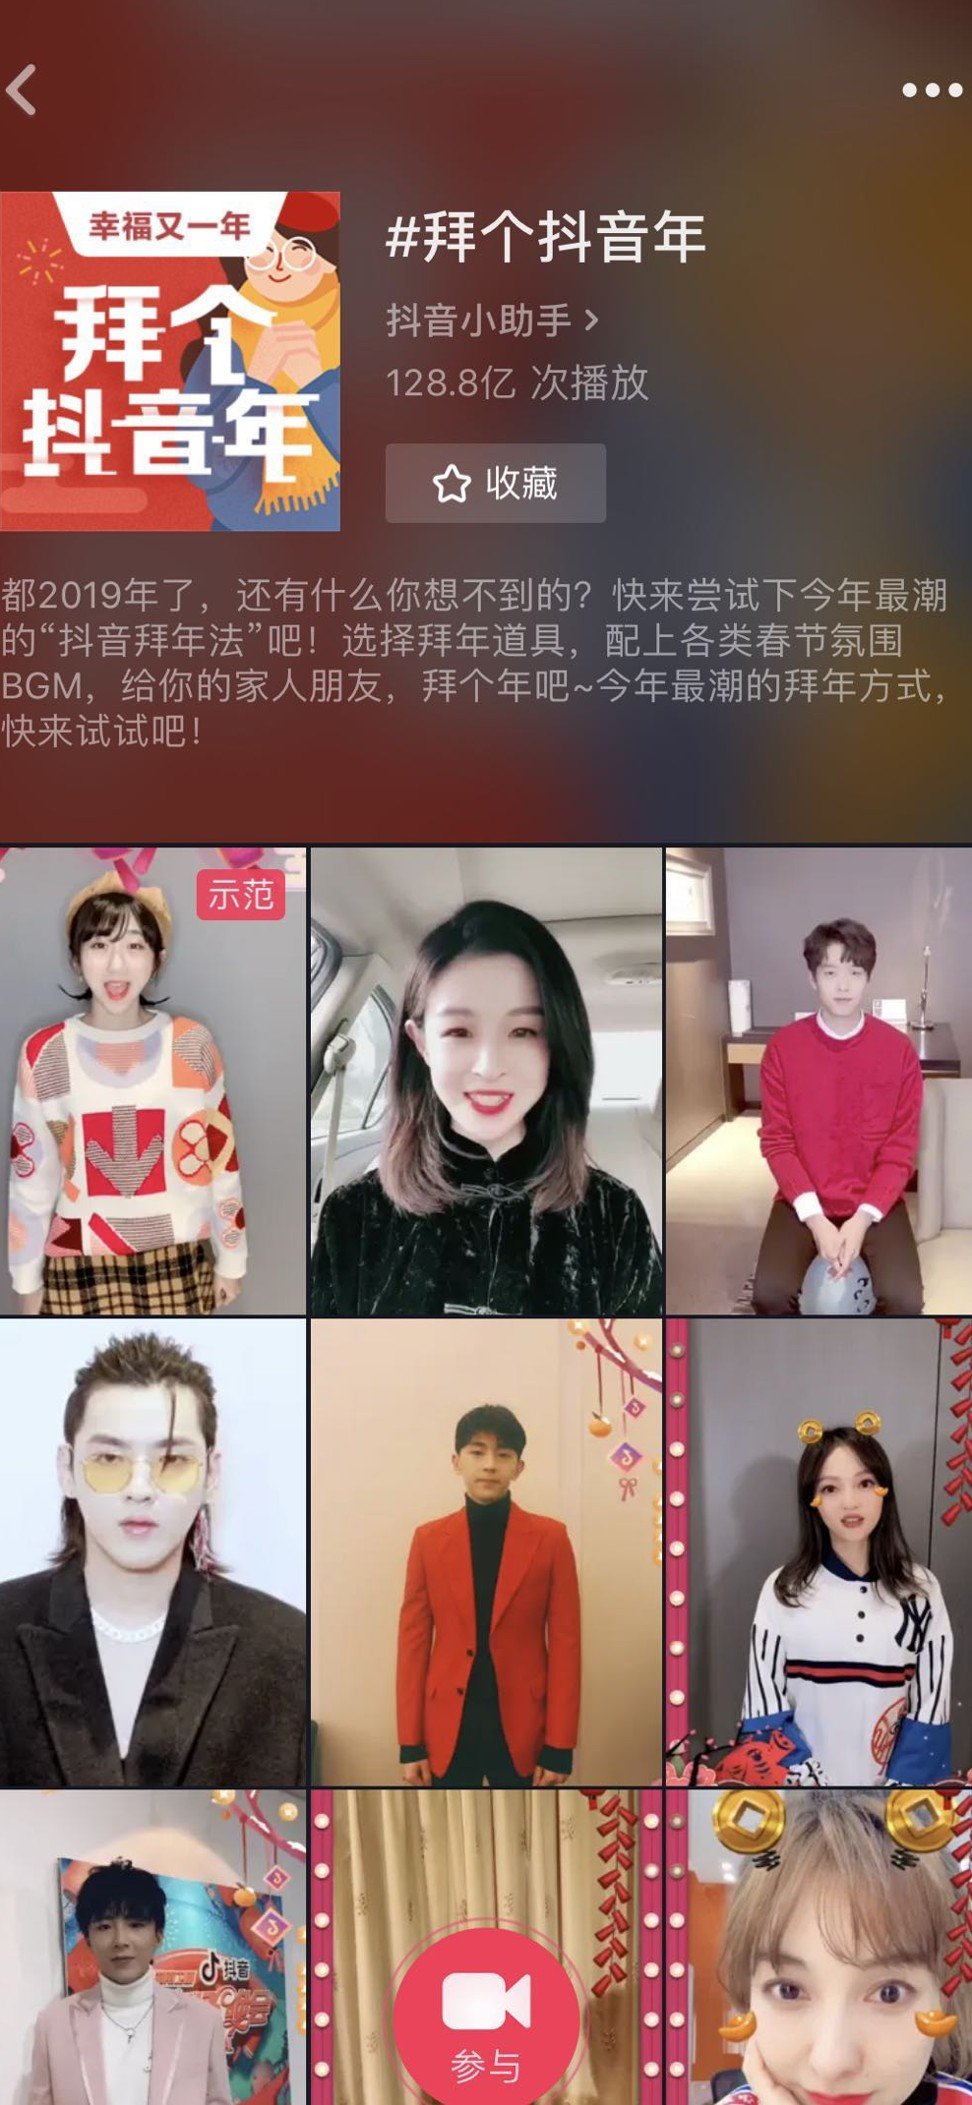 The Chinese short video app, Douyin, used its platform to feature Lunar New Year festive greetings from celebrities during the ‘Chunwan’ television gala.